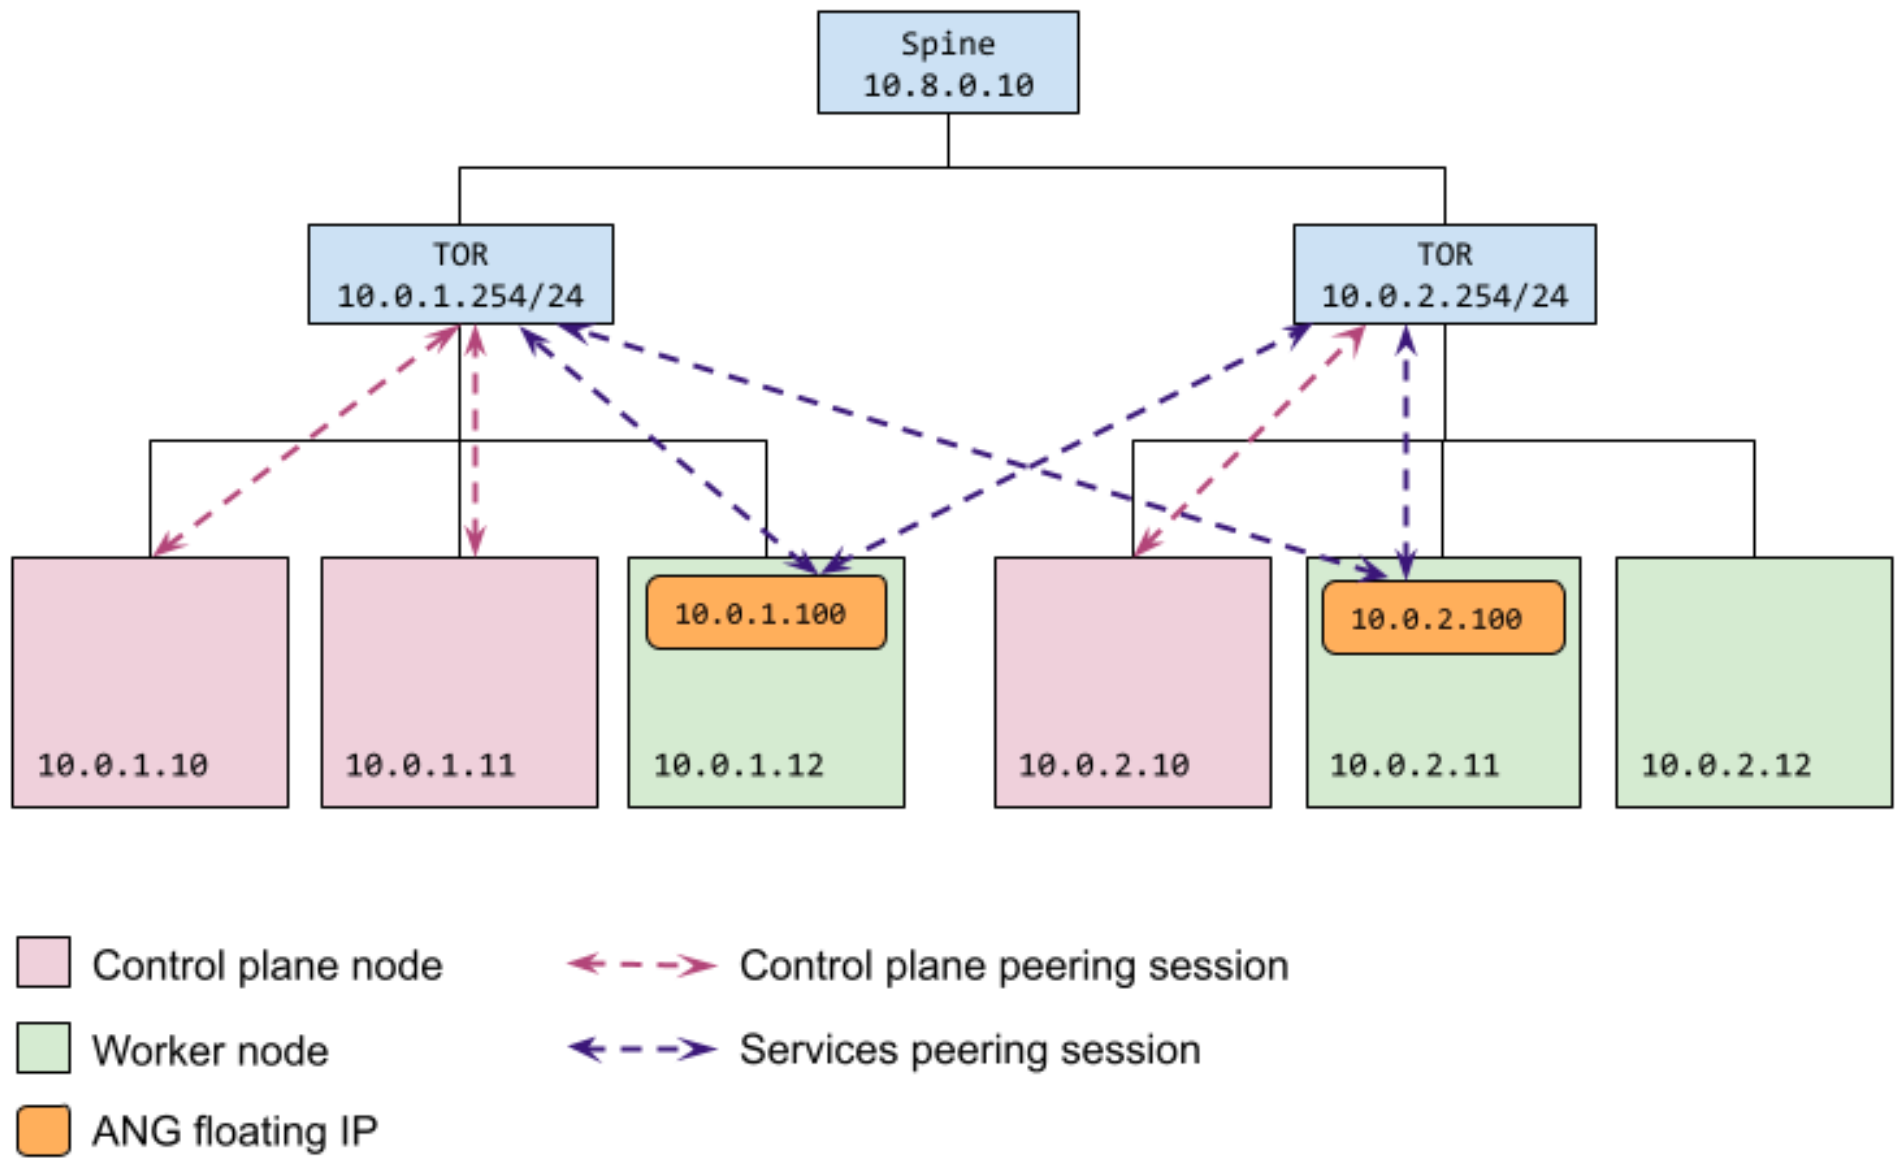 BGP load balancing with explicit mapping of control plane nodes to peers